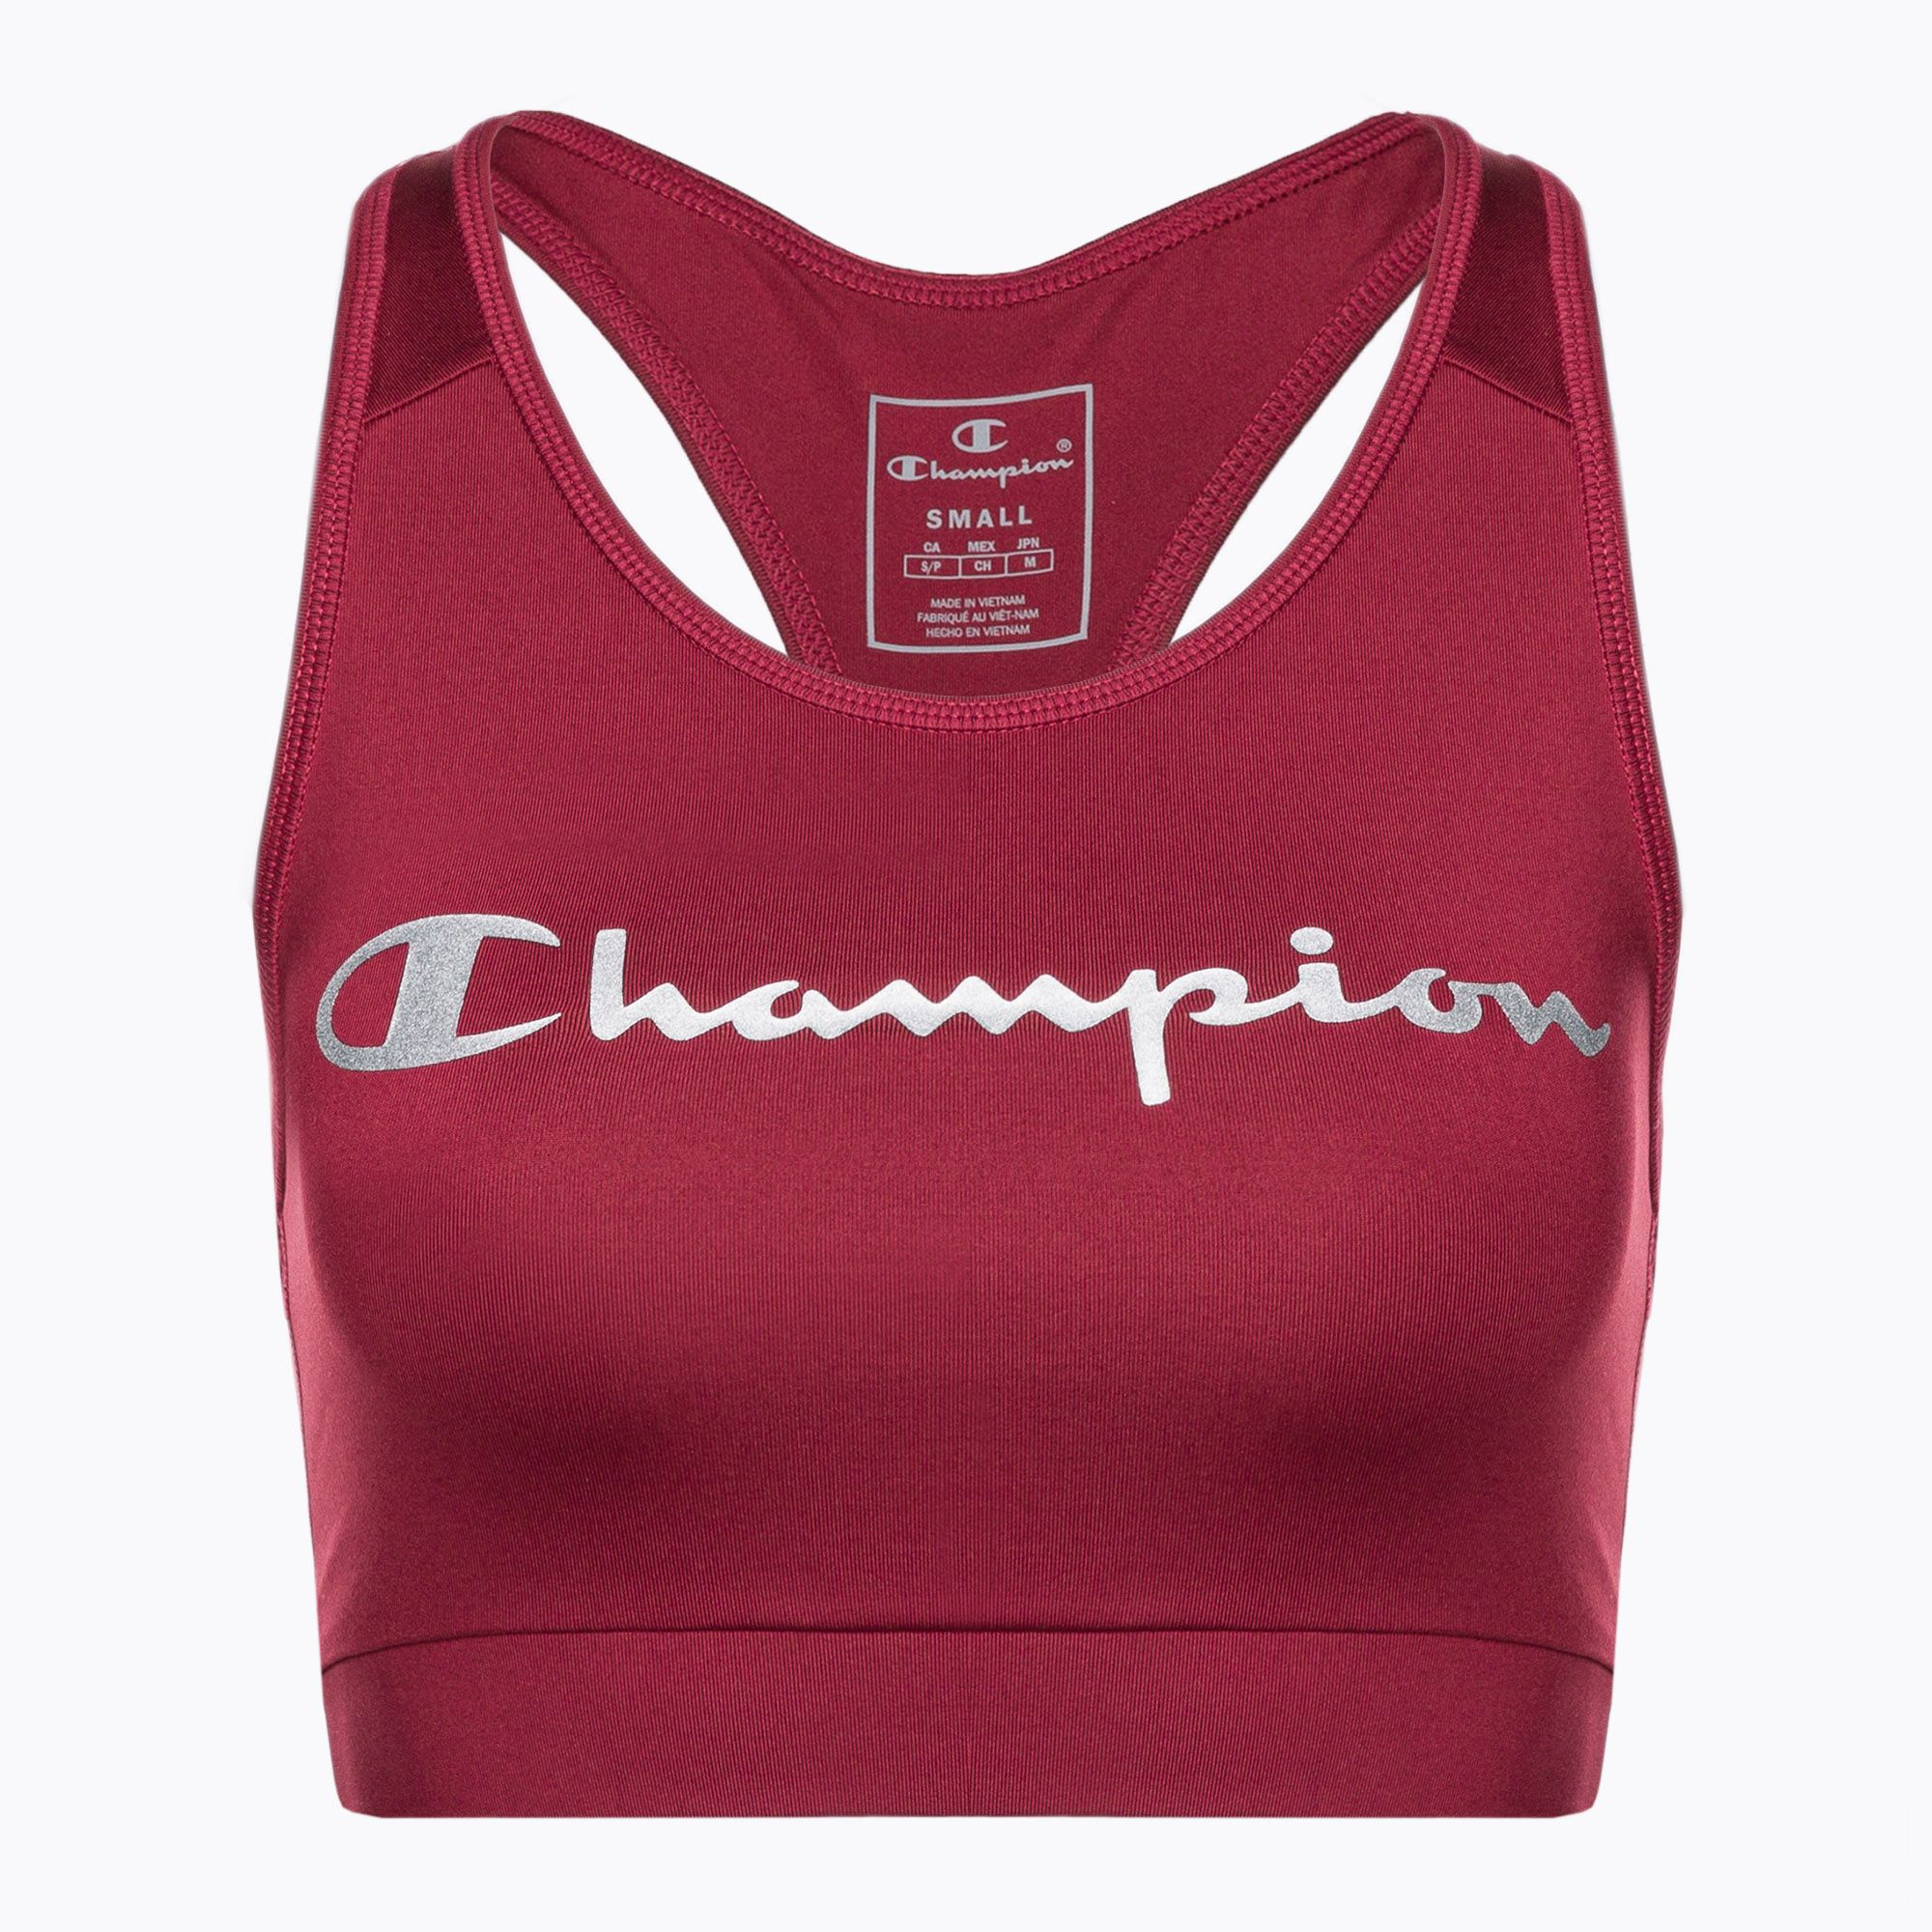 Champion Small Athletic Top Built In Bra Sleeveless Gym Shirt